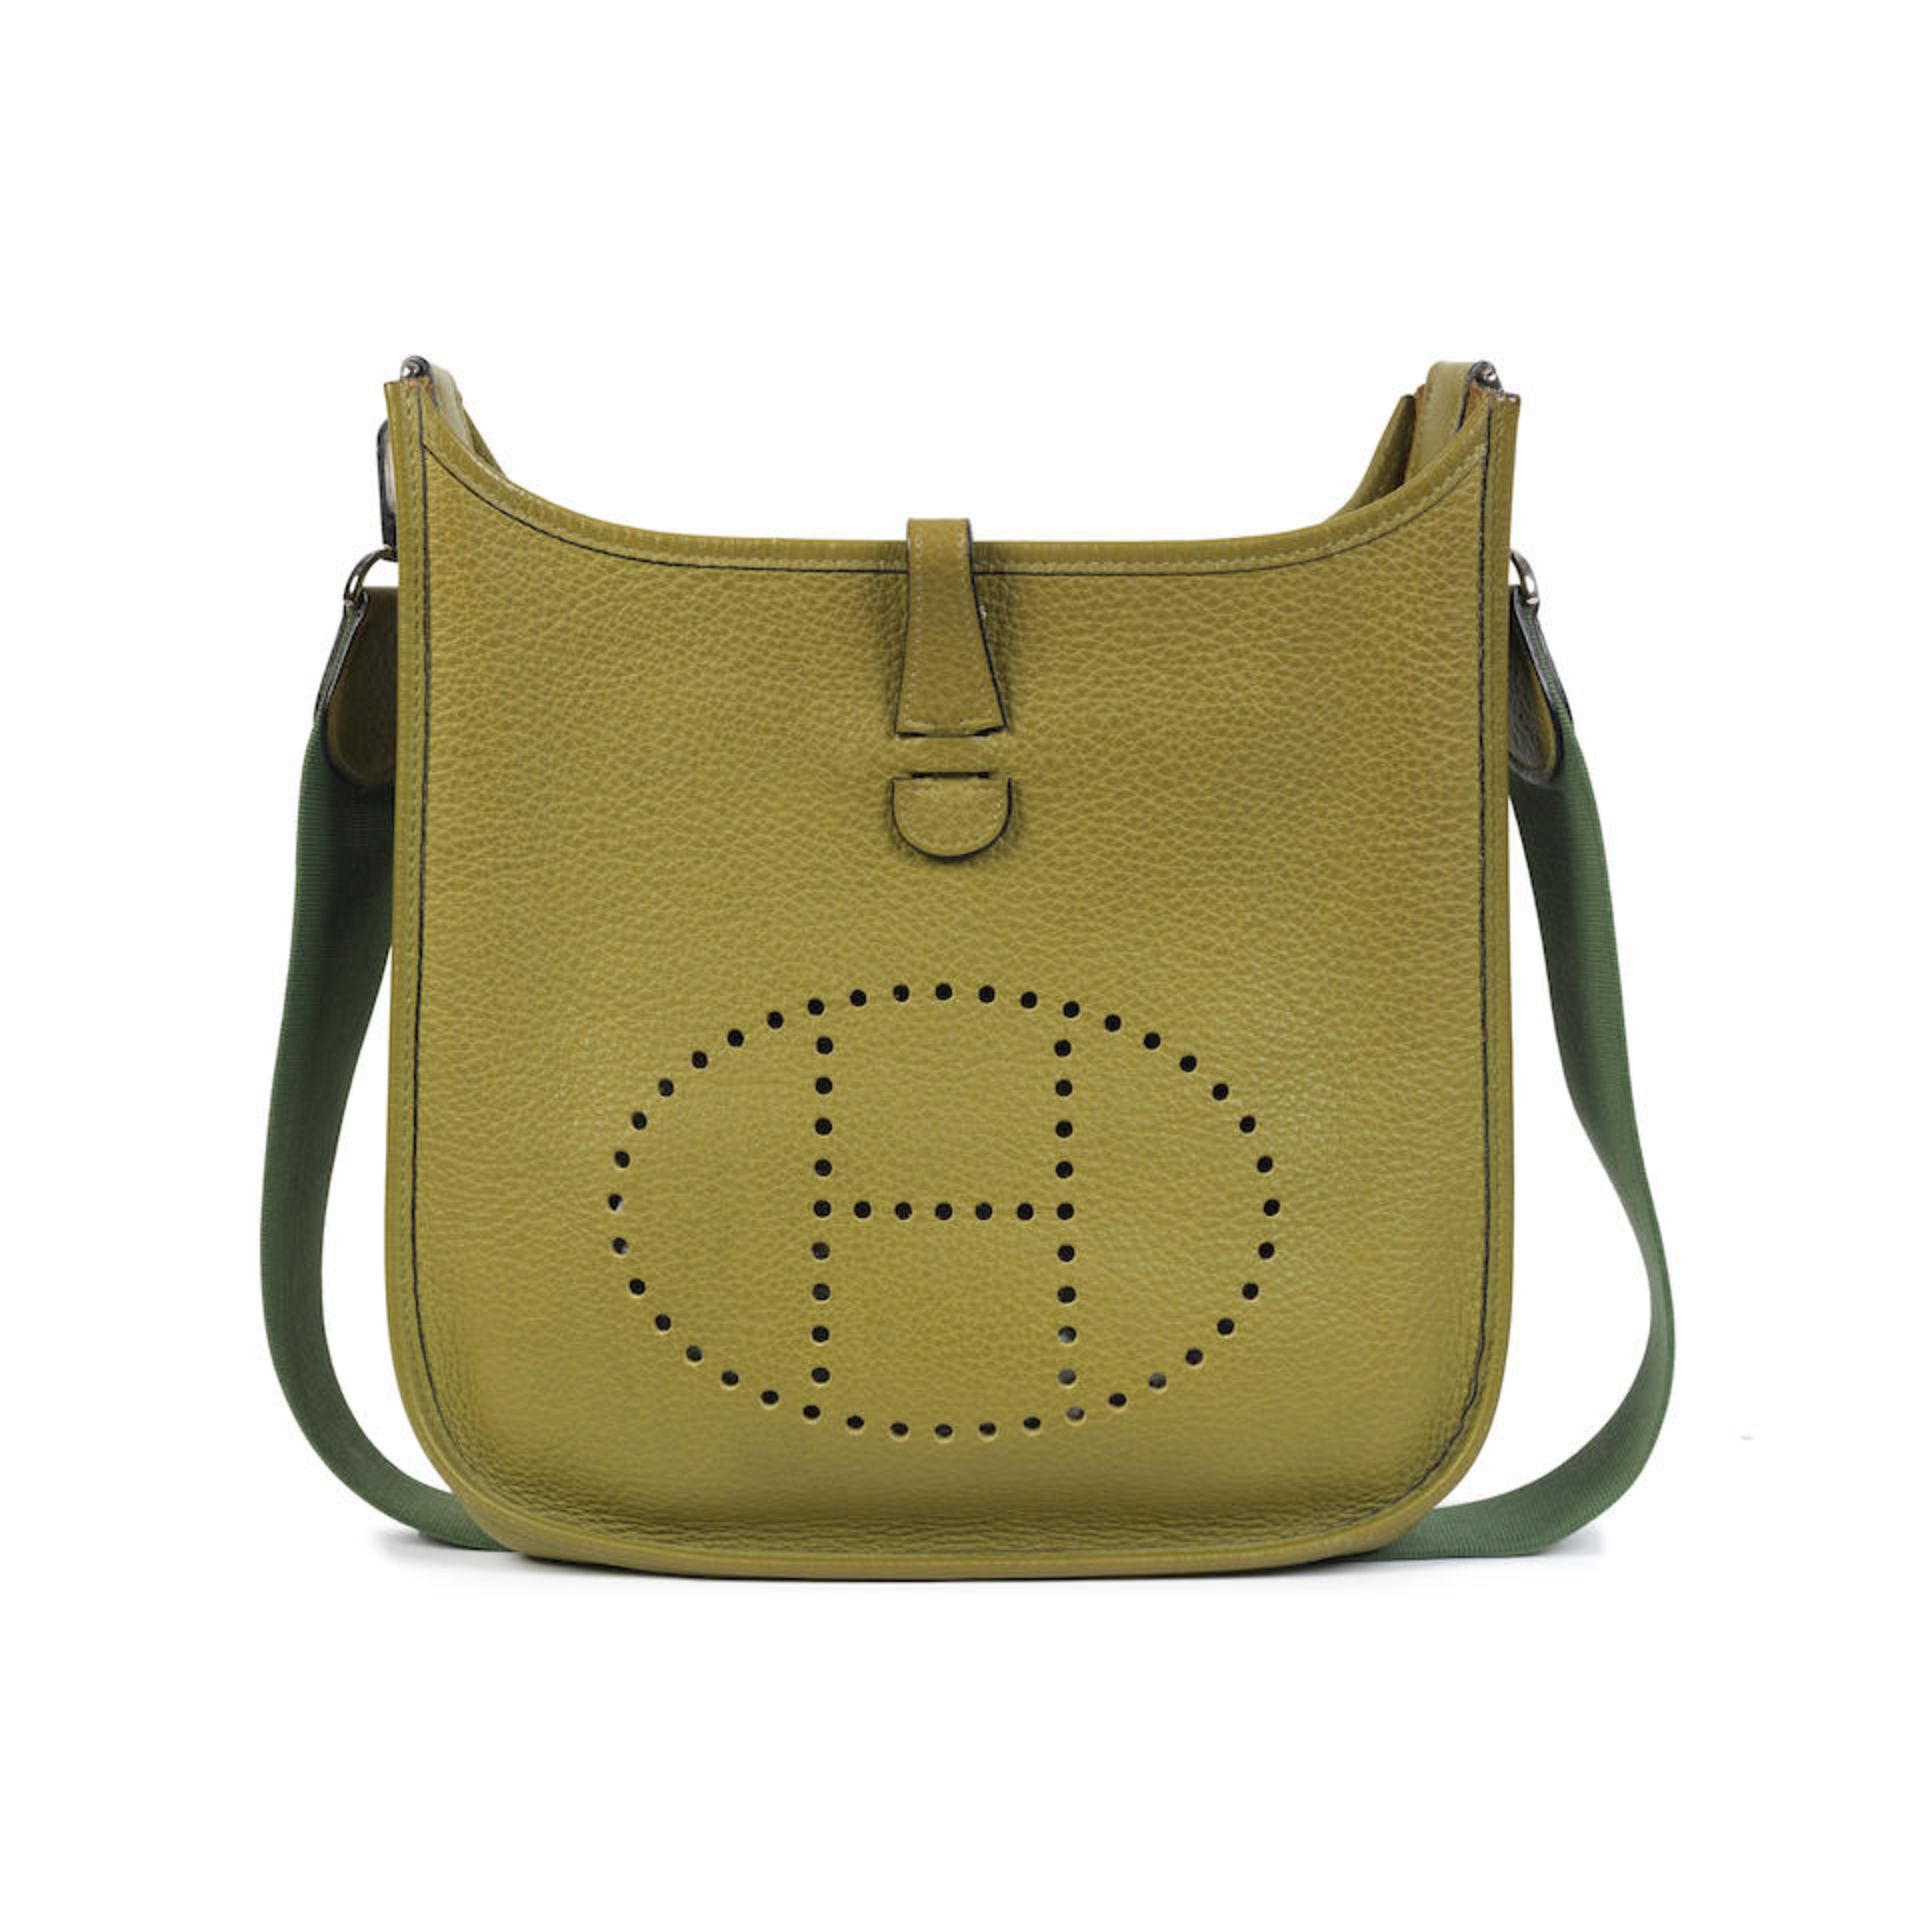 Hermès: a Chartreuse Clemence Leather Evelyne GM 2004 (includes dust bag)